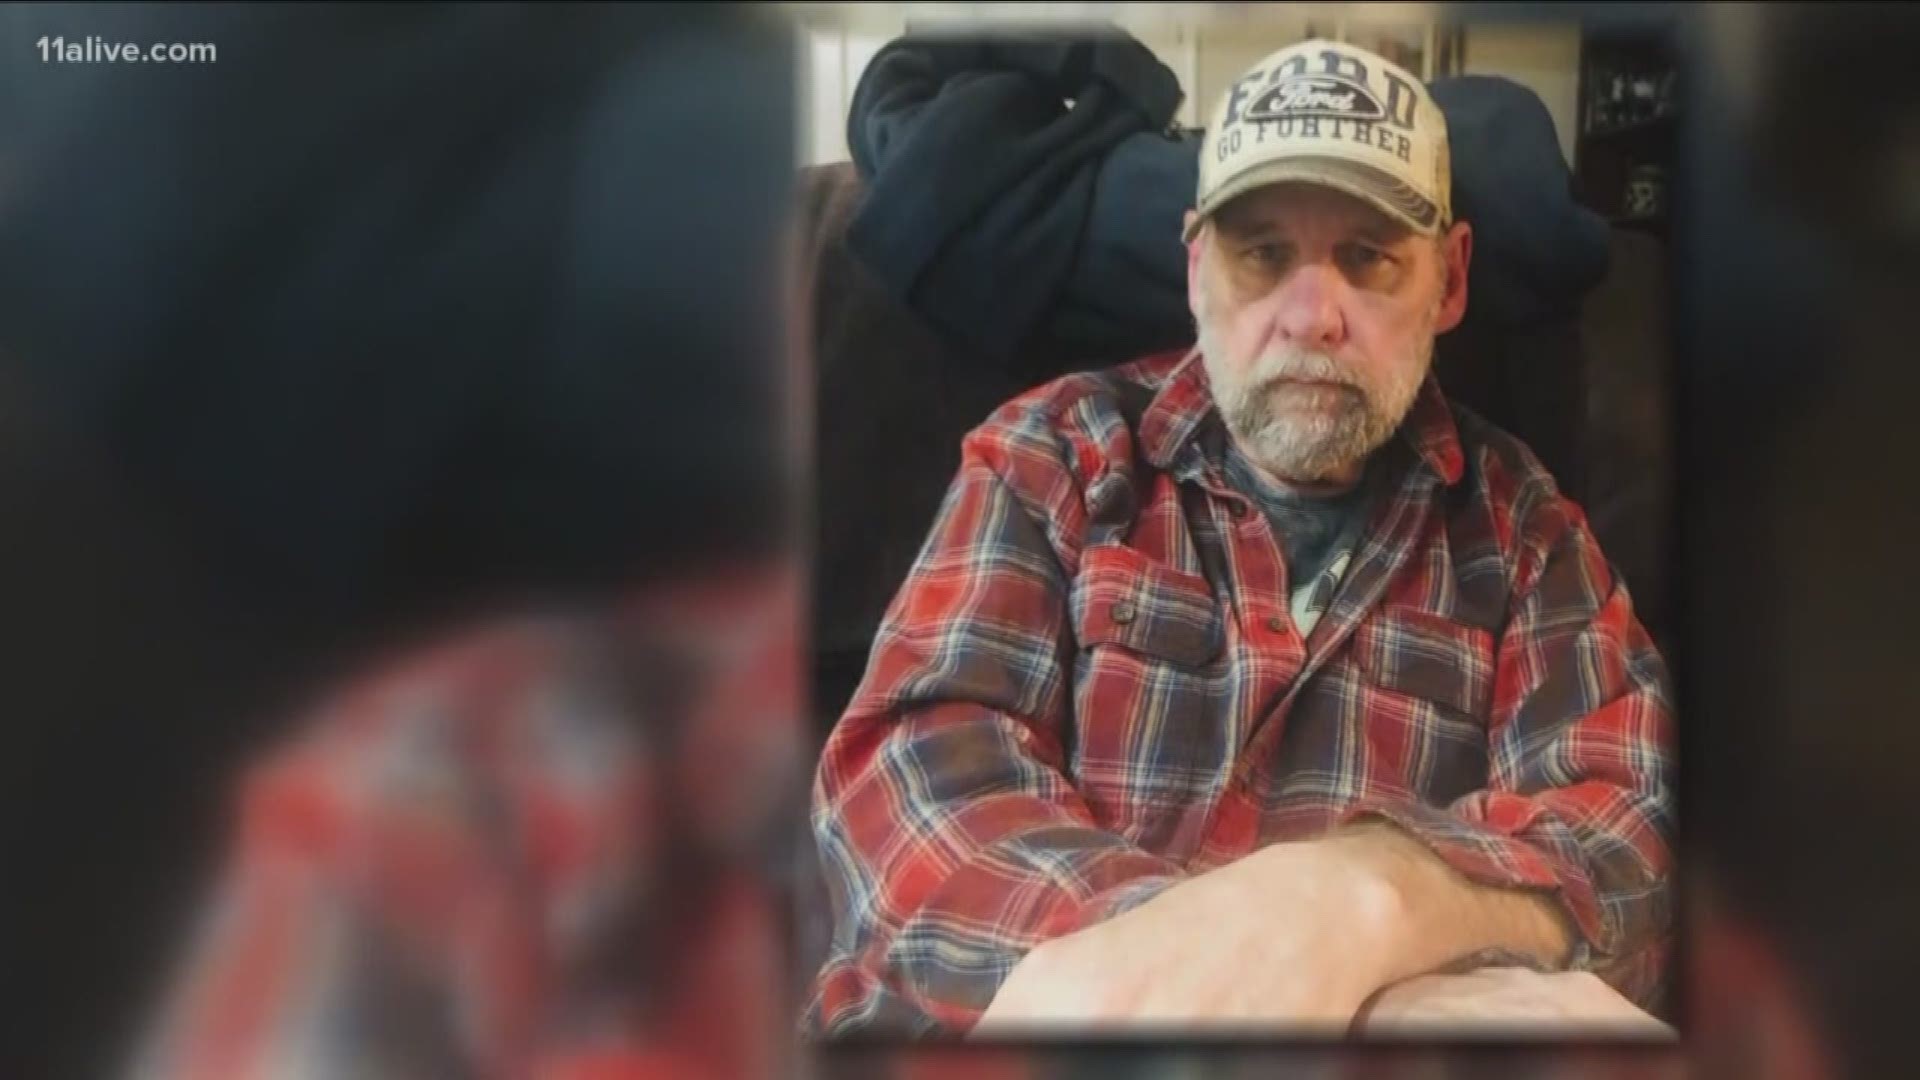 Timothy Osborne, 58, has been missing for nearly two weeks. Henry County Police Department said they got a call around noon on Monday that a body was found in the water but they have not confirmed that it is Osborne.